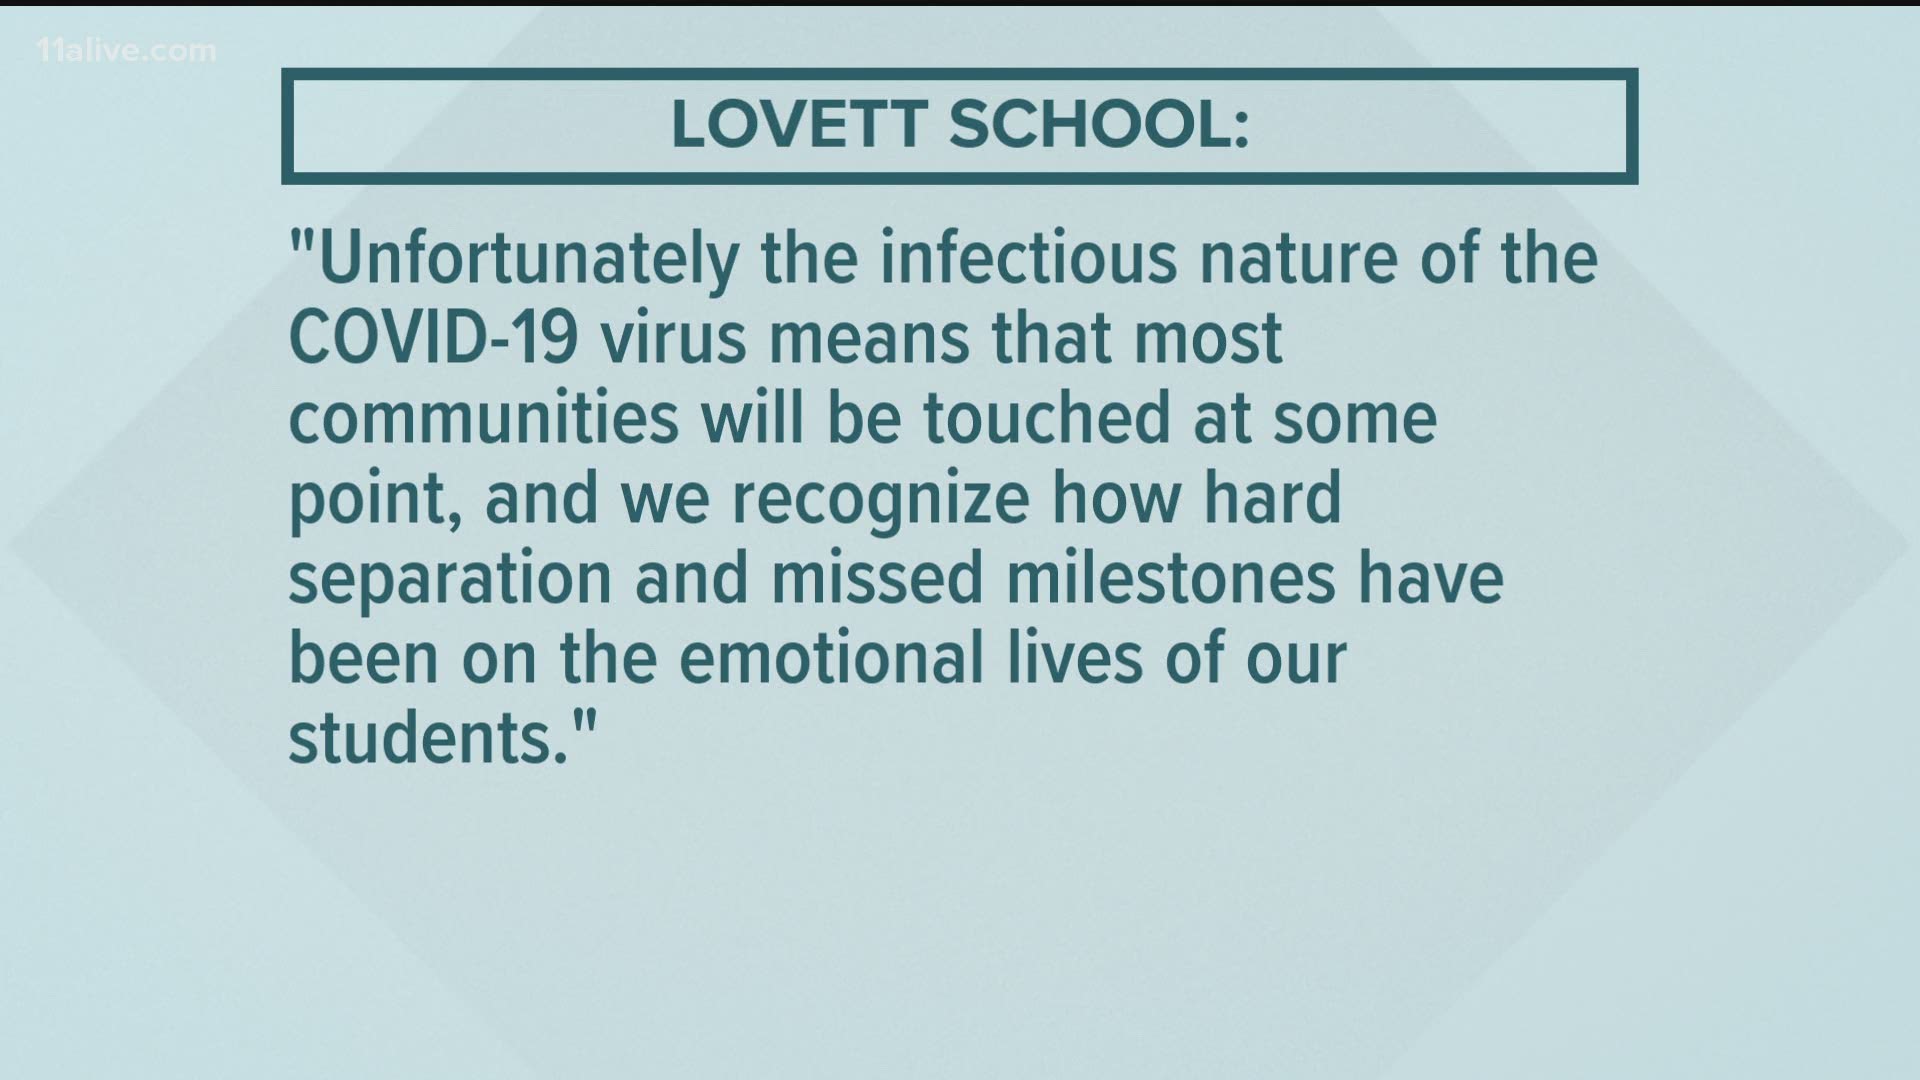 The Lovett School didn't have details on how the infections occurred but did report that the families of several Lovett graduates had contracted the virus.